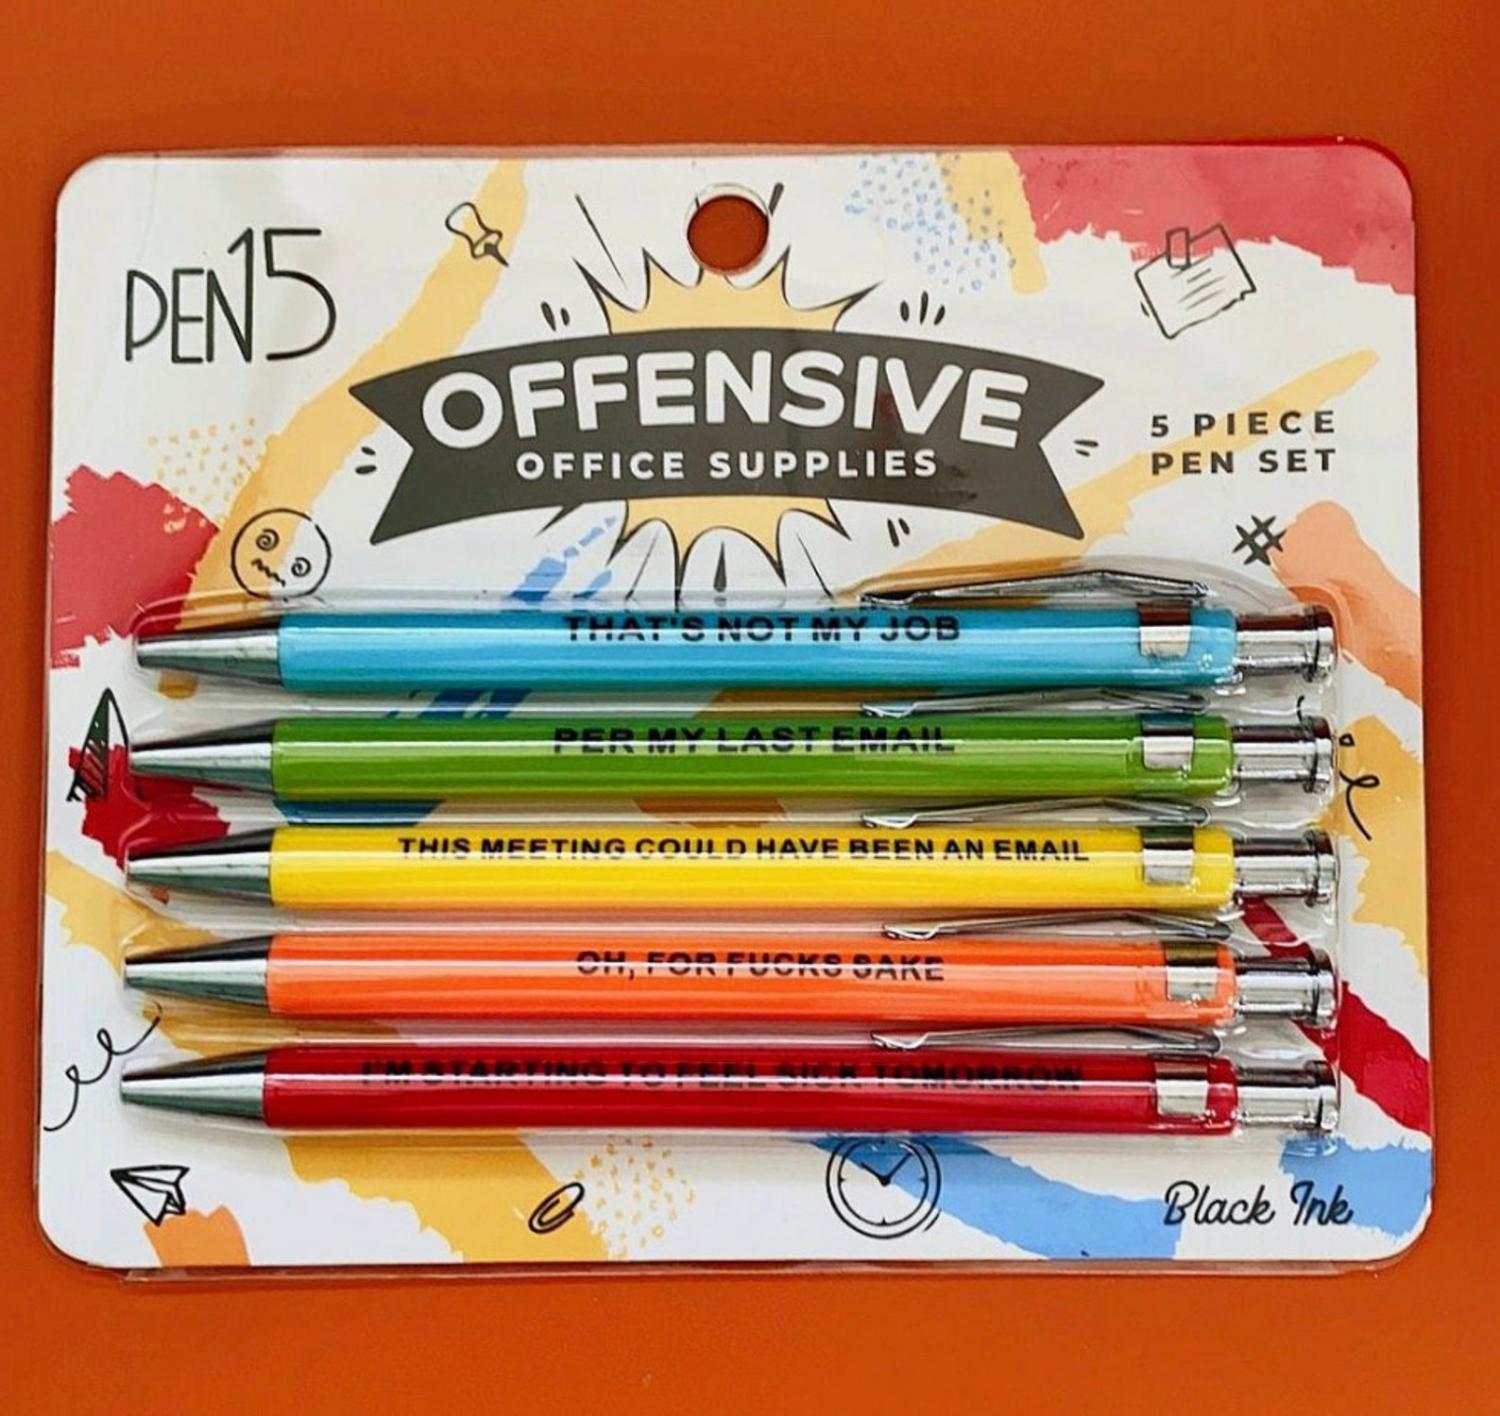 Offensive office pens - snarky office pens